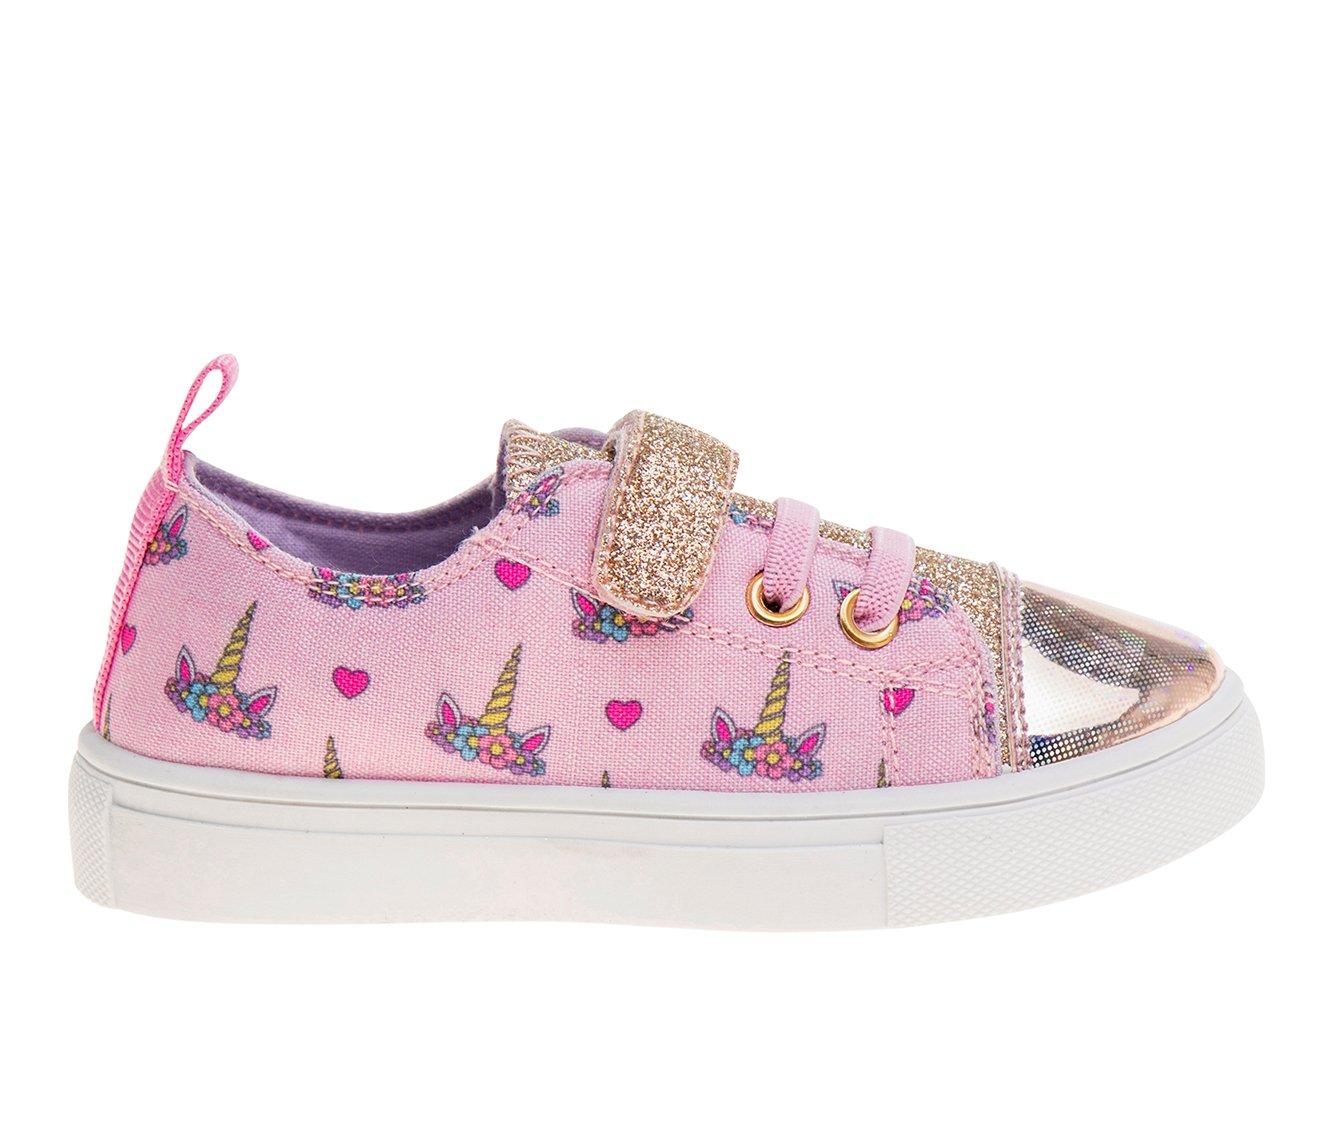 Girls' Nanette Lepore Toddler Paige Sneakers